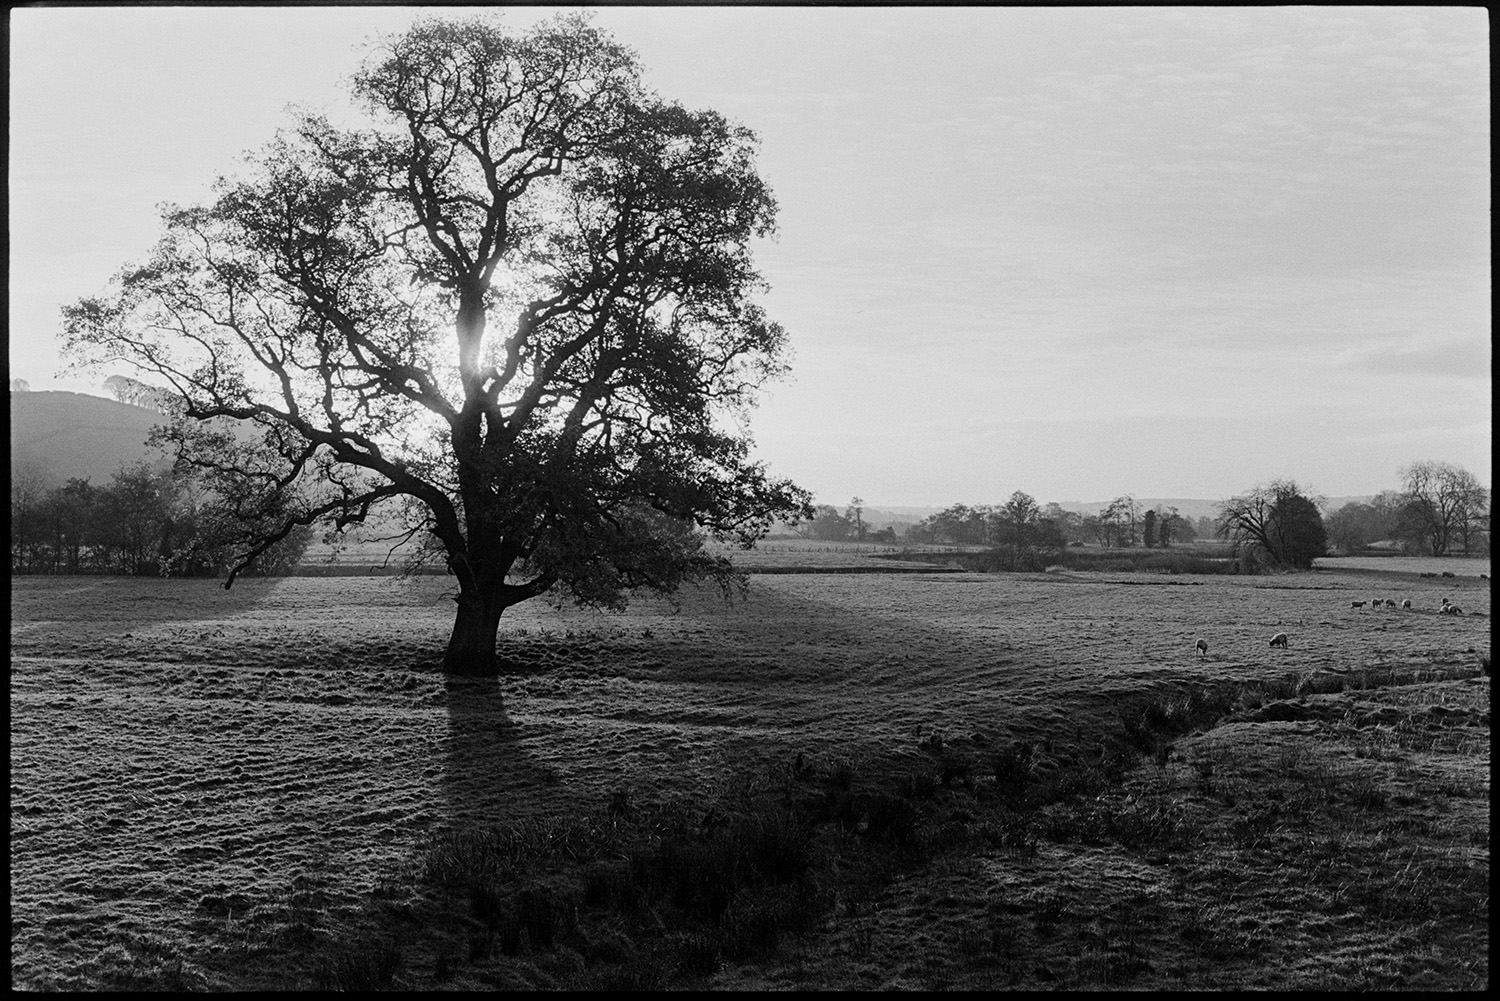 Landscape with large oak tree against the sun. 
[A large oak tree silhouetted in a field at Newbridge, Bishops Tawton. Sheep are visible grazing in the background.]